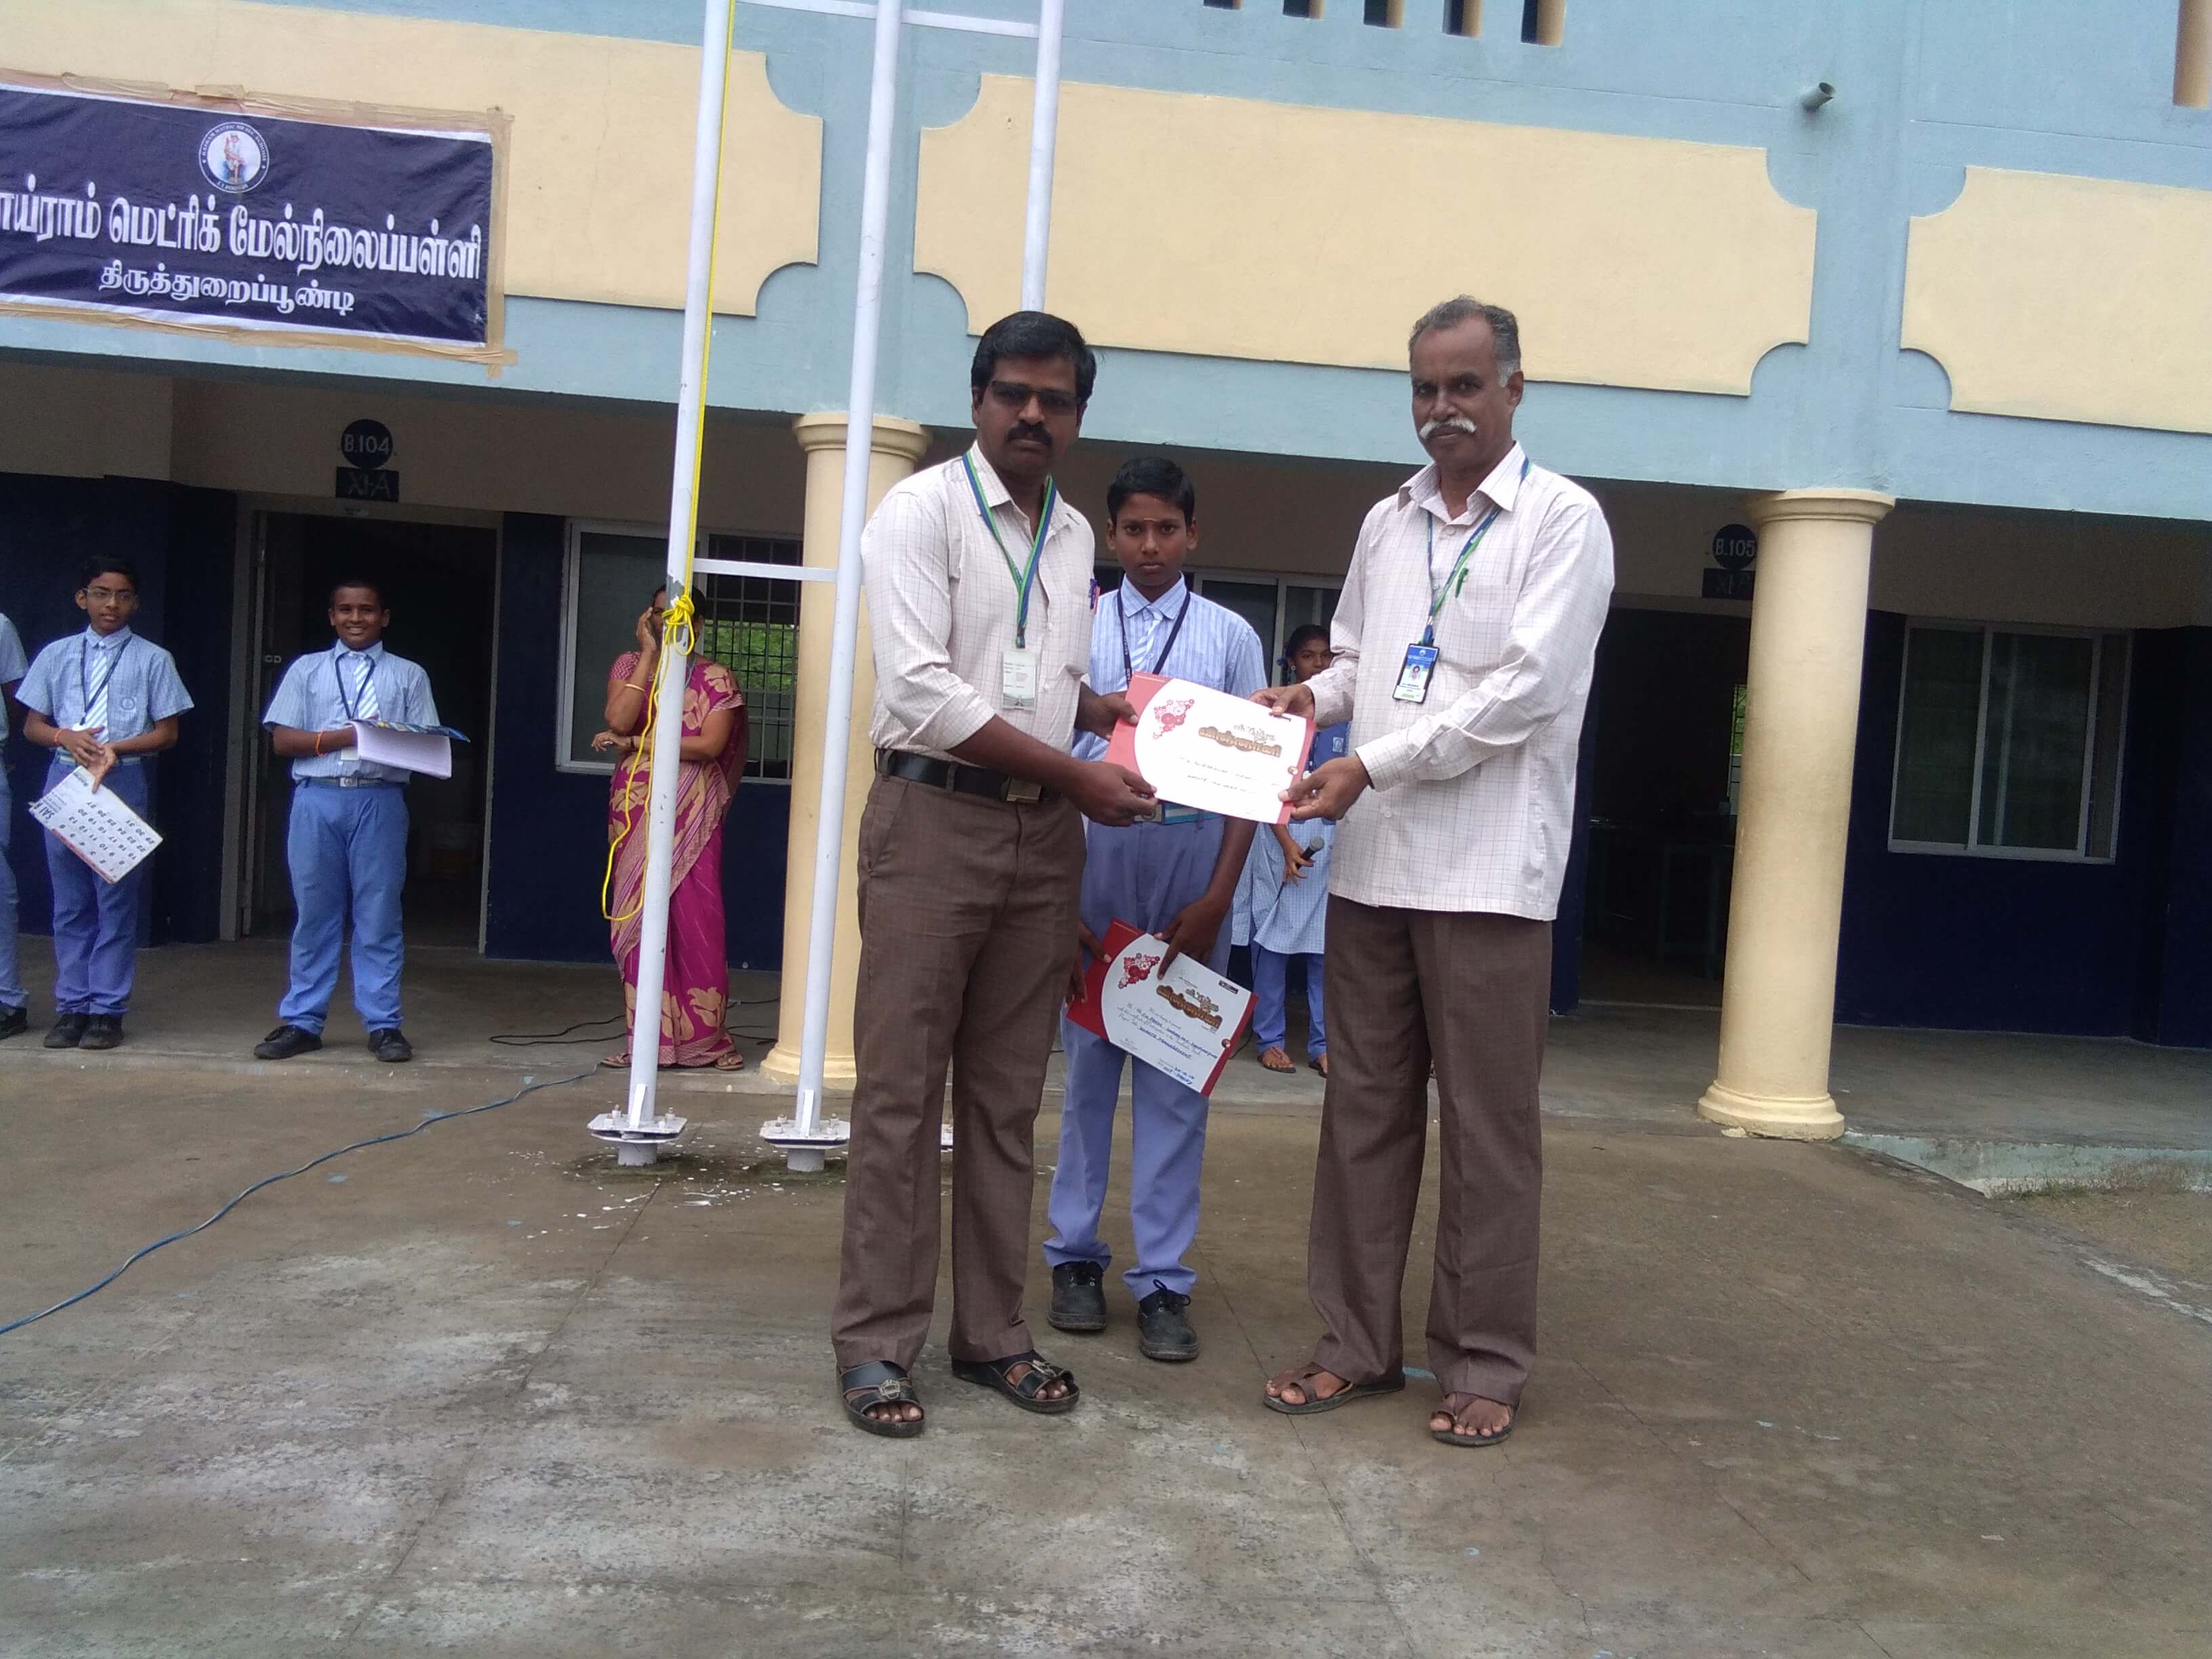 Our school student S.V. Prem, VIII Std. Participated in State Level Science Exhibition conducted by Puthiyathalaimurai TV.